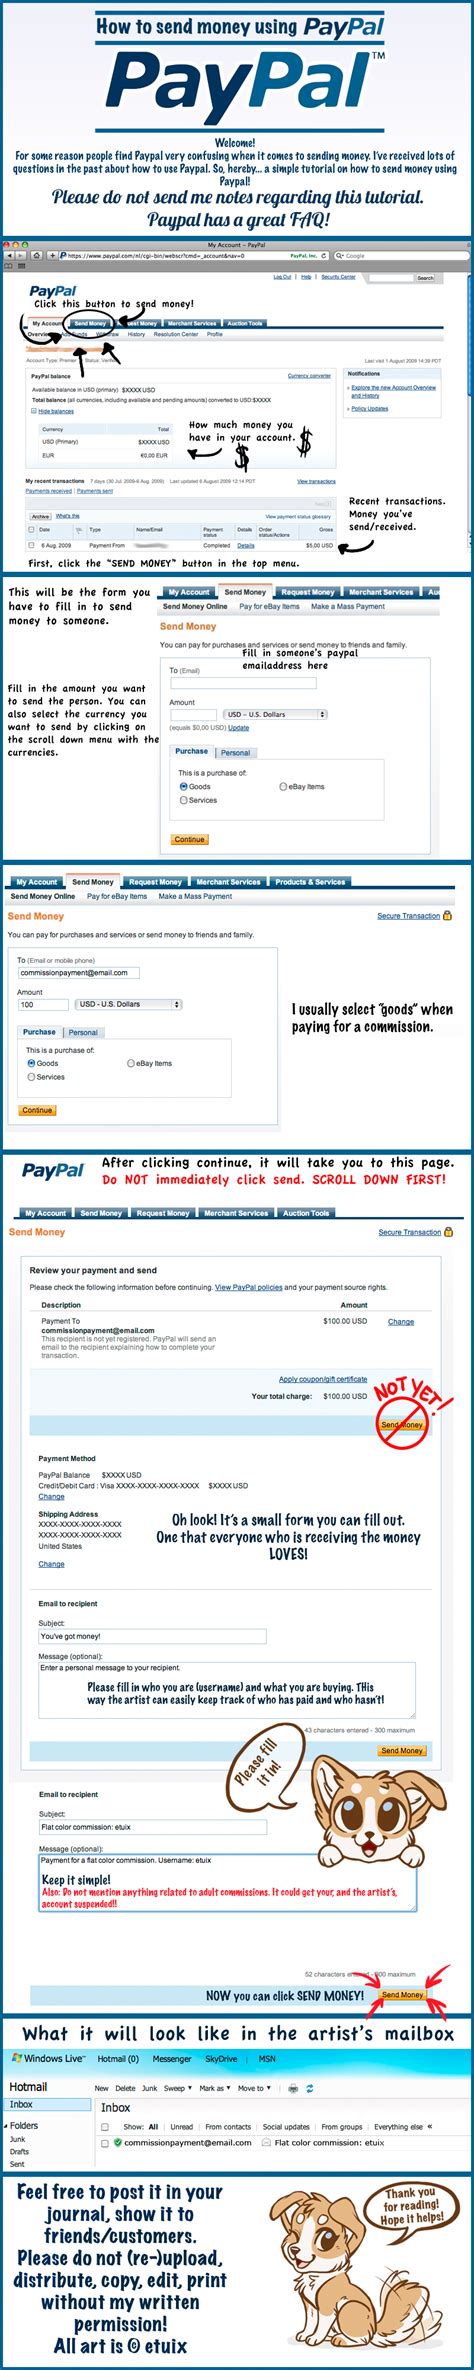 How do i send money internationally with my debit card? How to send money using PAYPAL by etuix on DeviantArt